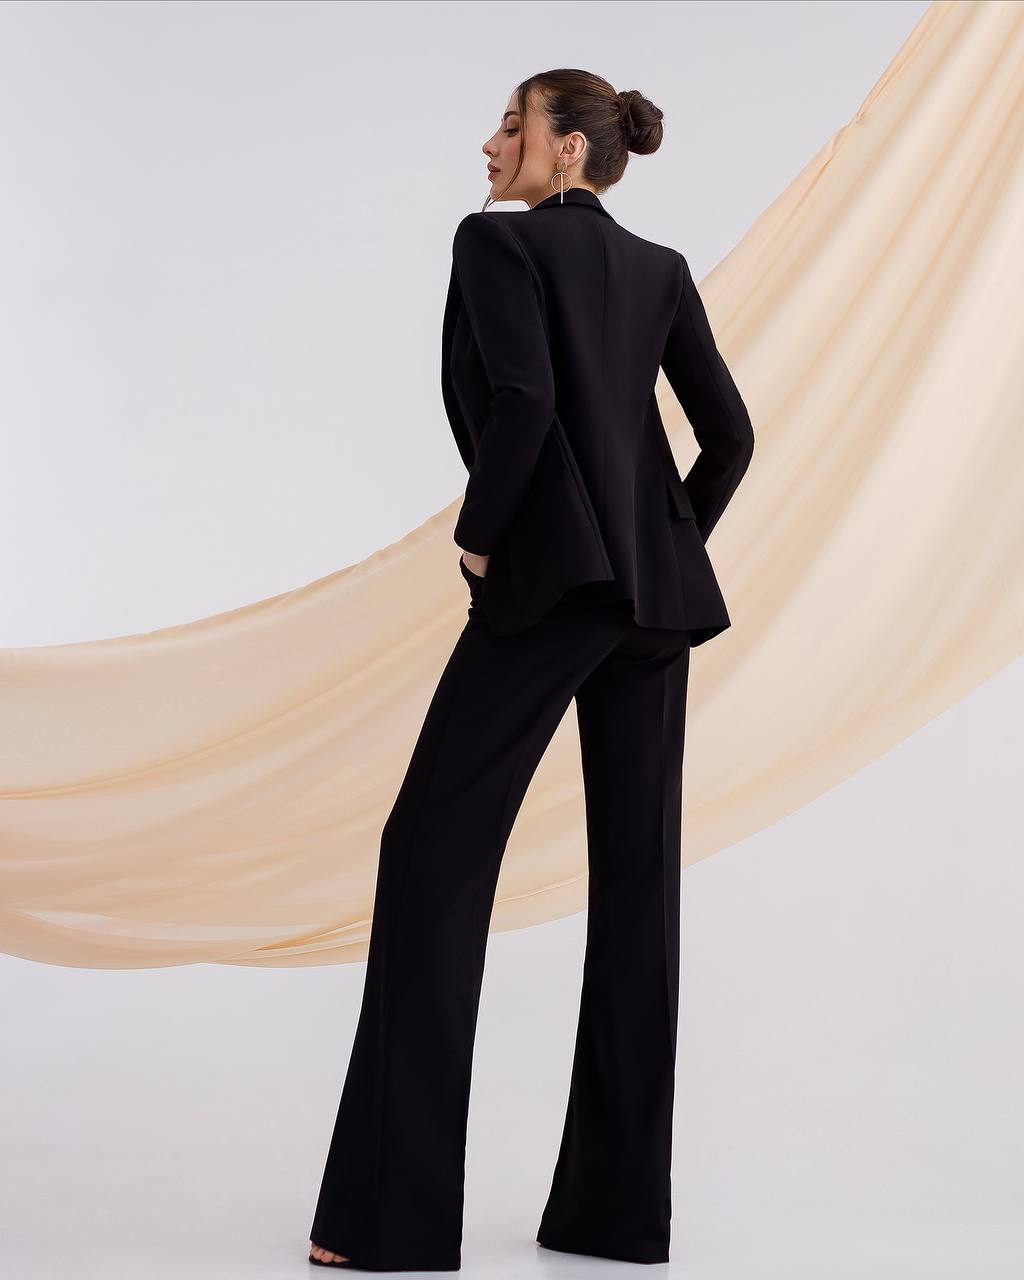 a woman wearing a black suit and pants